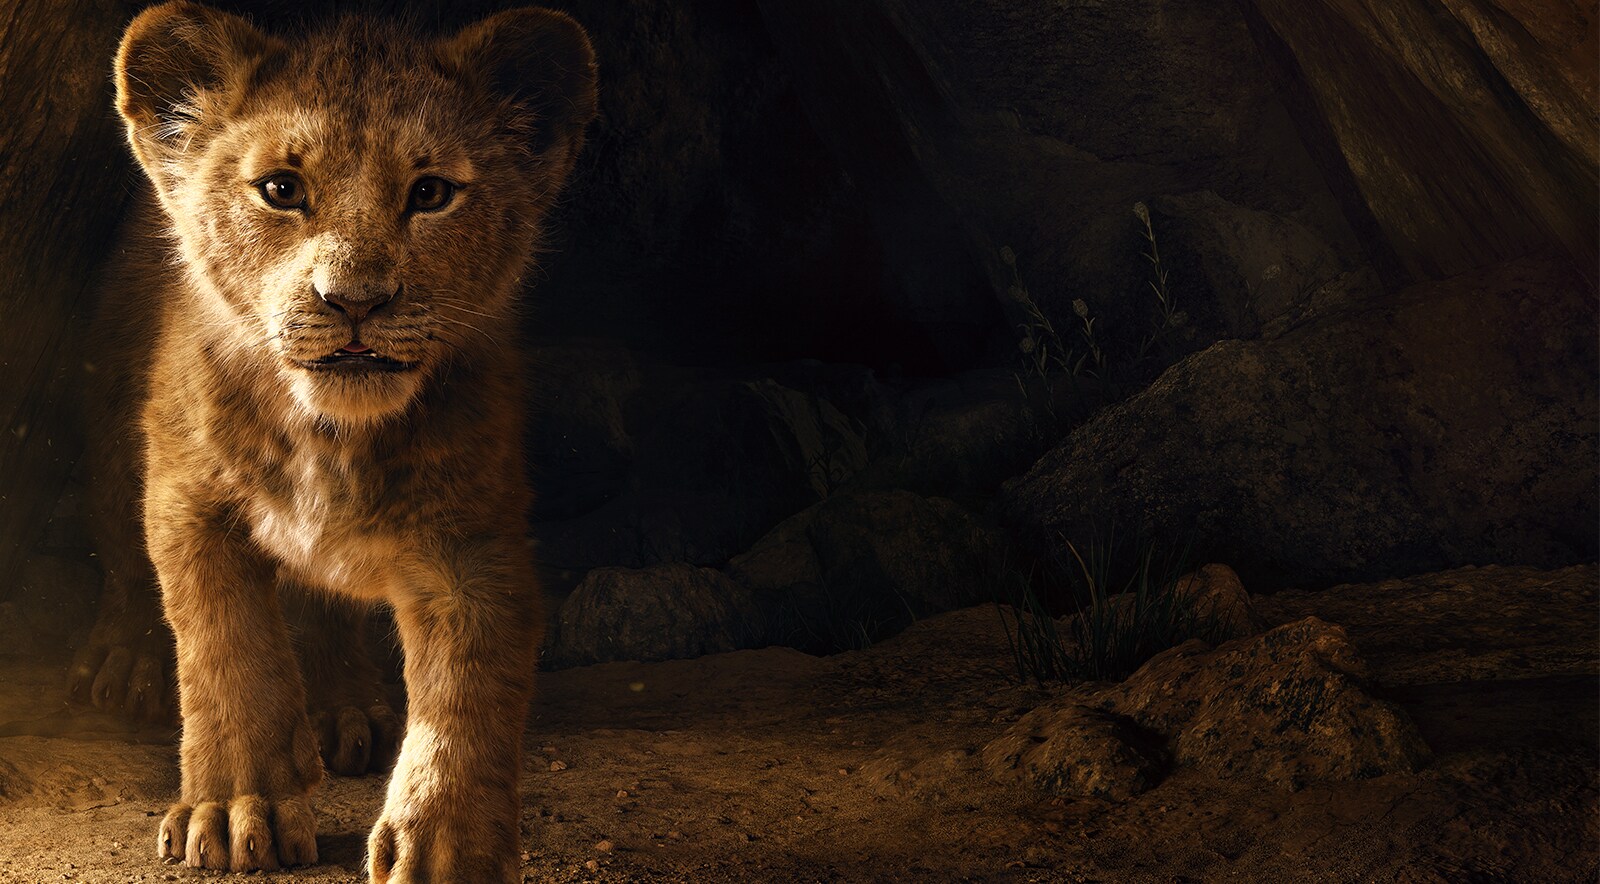 The Lion King | Synopsis